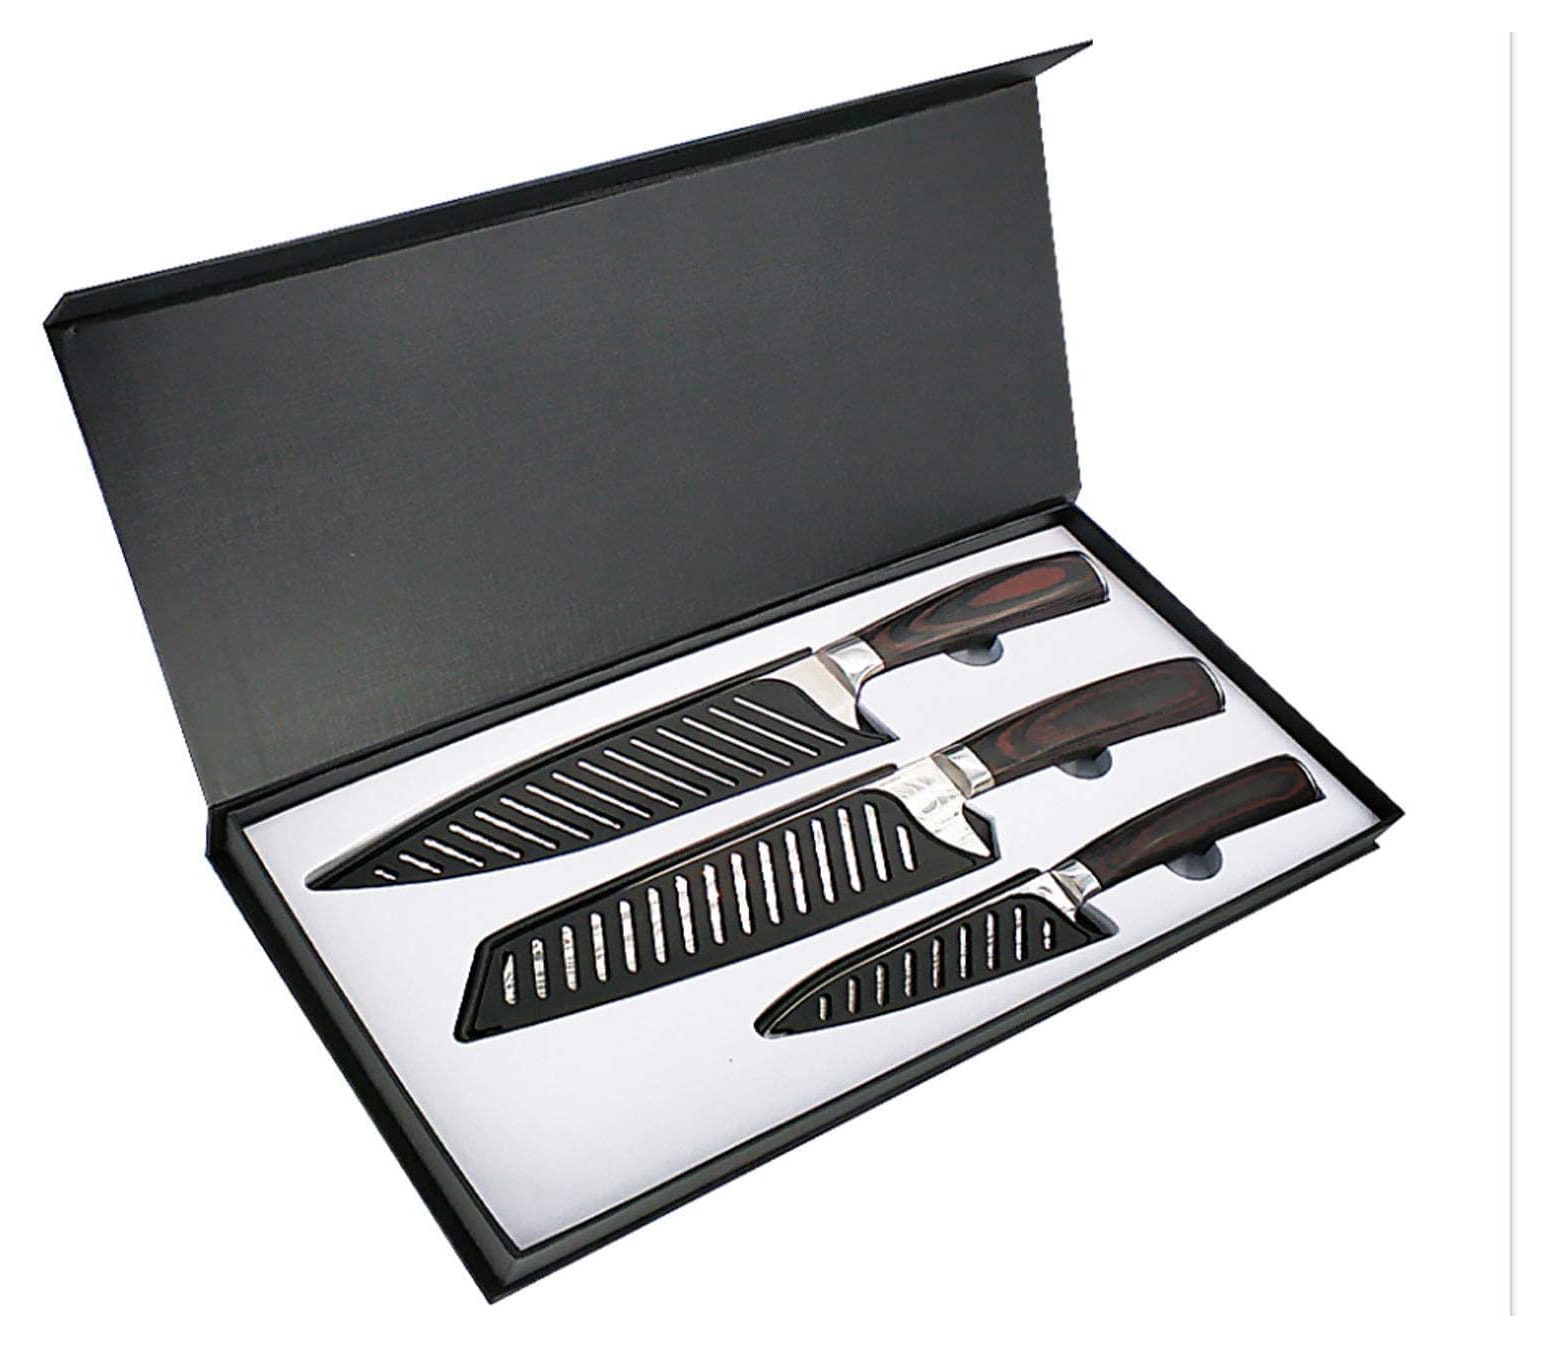 CUTLINX Kitchen Gifts for Men - Unique Gifts for Chef - Cooking Gifts for  Him - Housewarming Gifts for Men - Kitchen Knife Gift Set